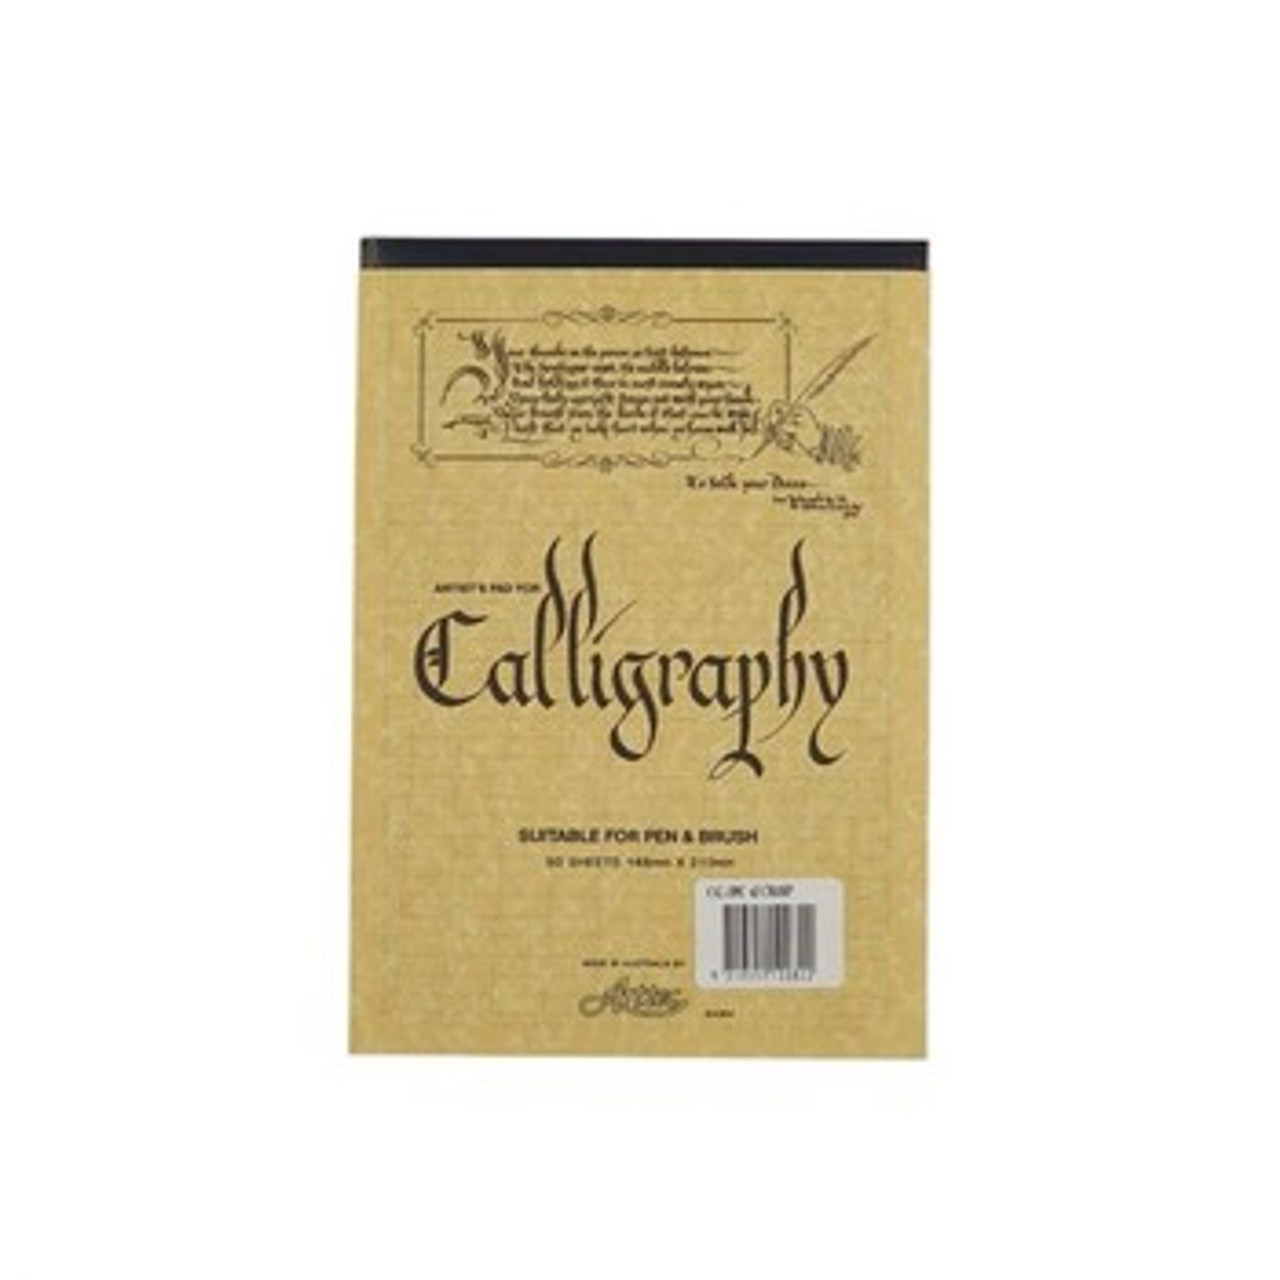 Arttec Calligraphy Pad A4 assorted colour